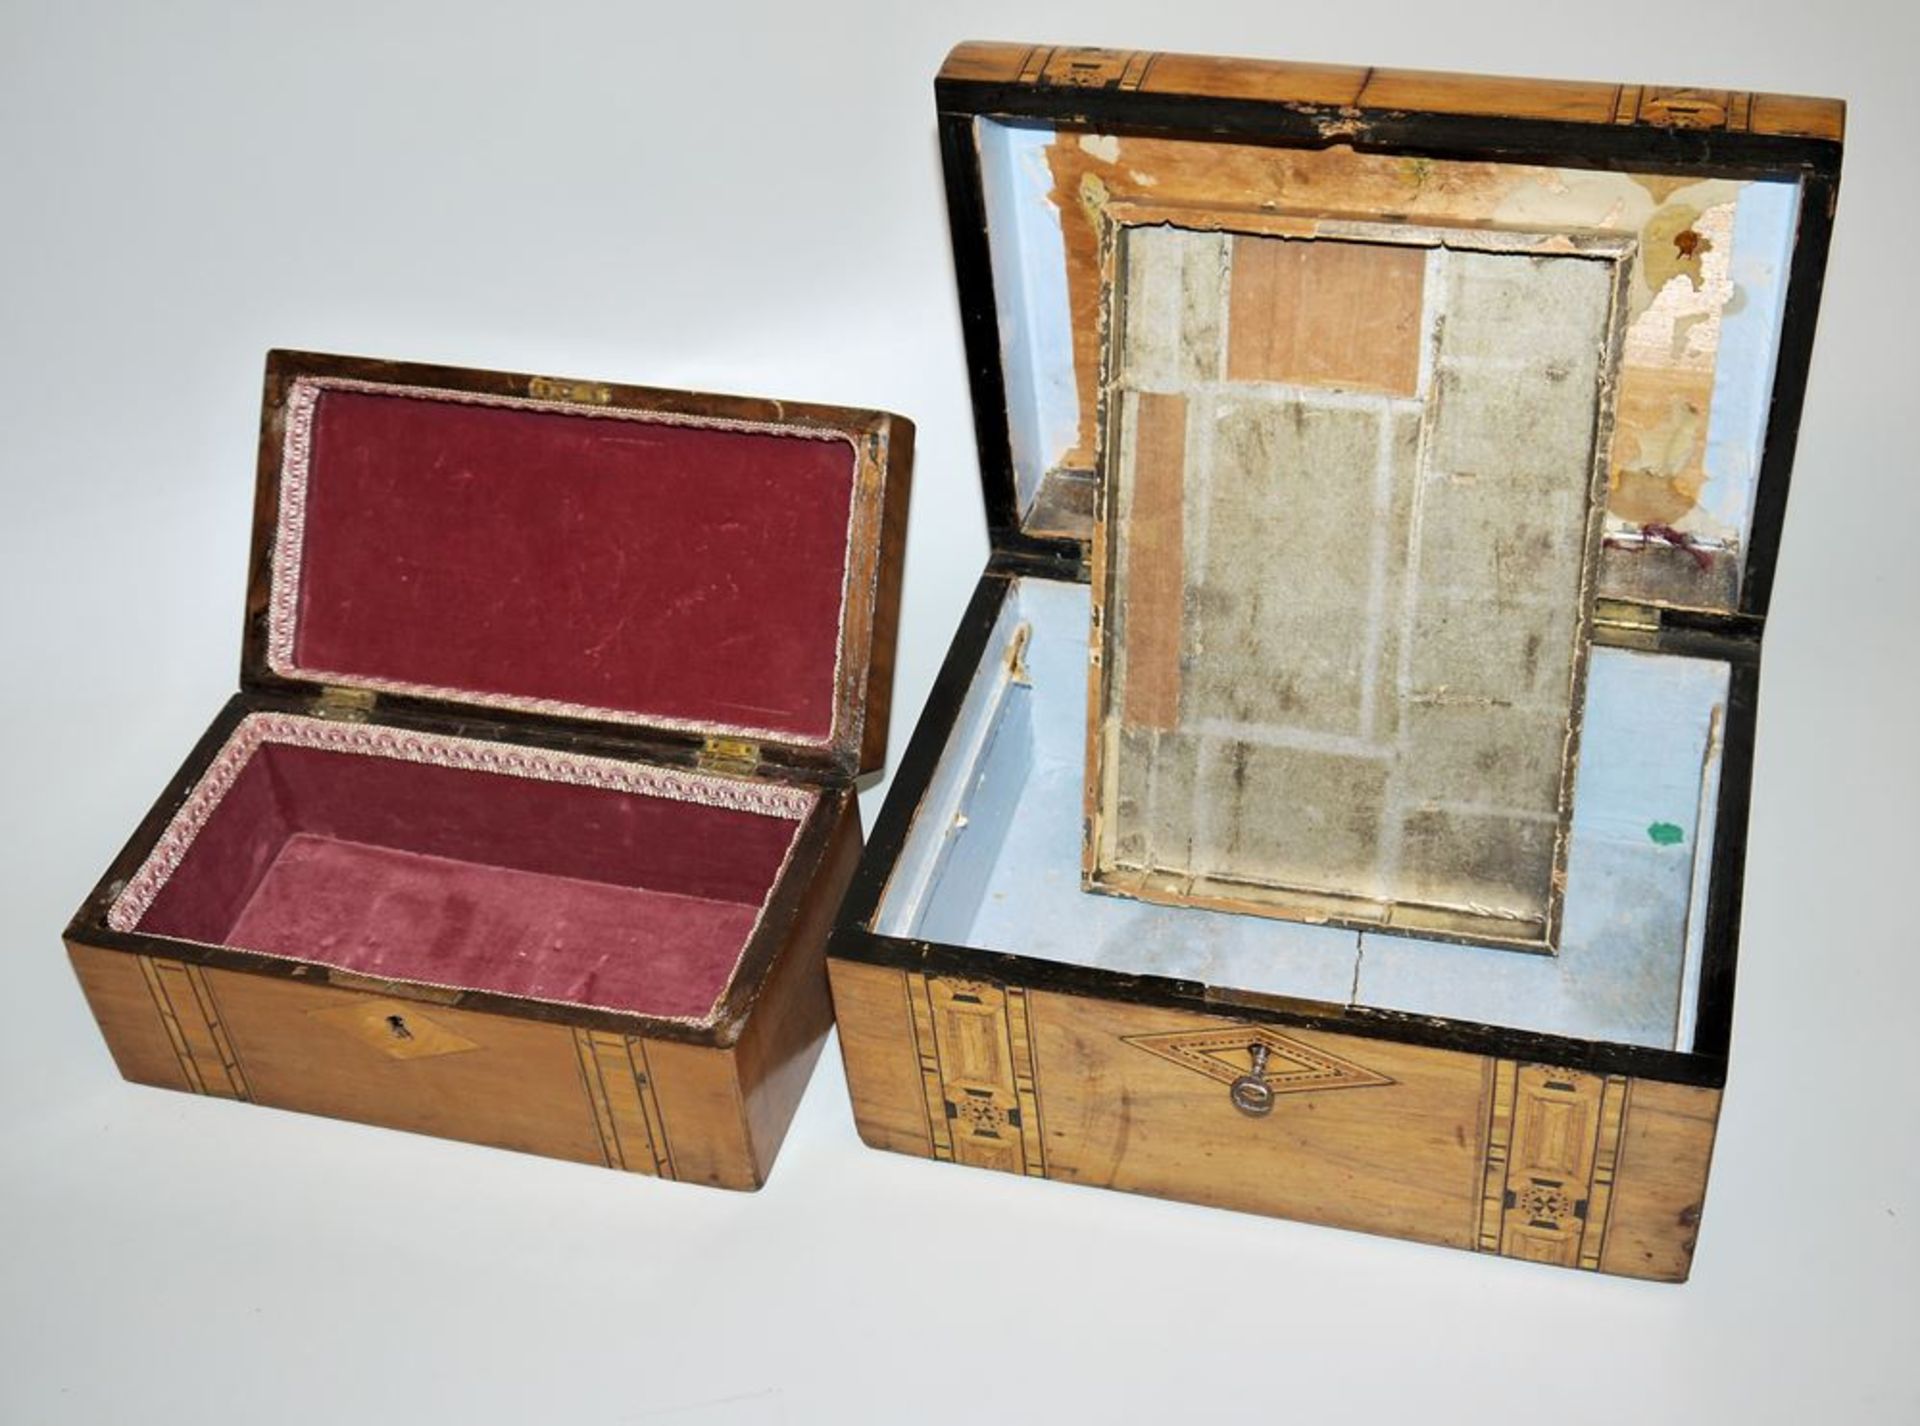 Two Victorian caskets with ribbon inlay, 2nd half 19th c. - Image 2 of 2